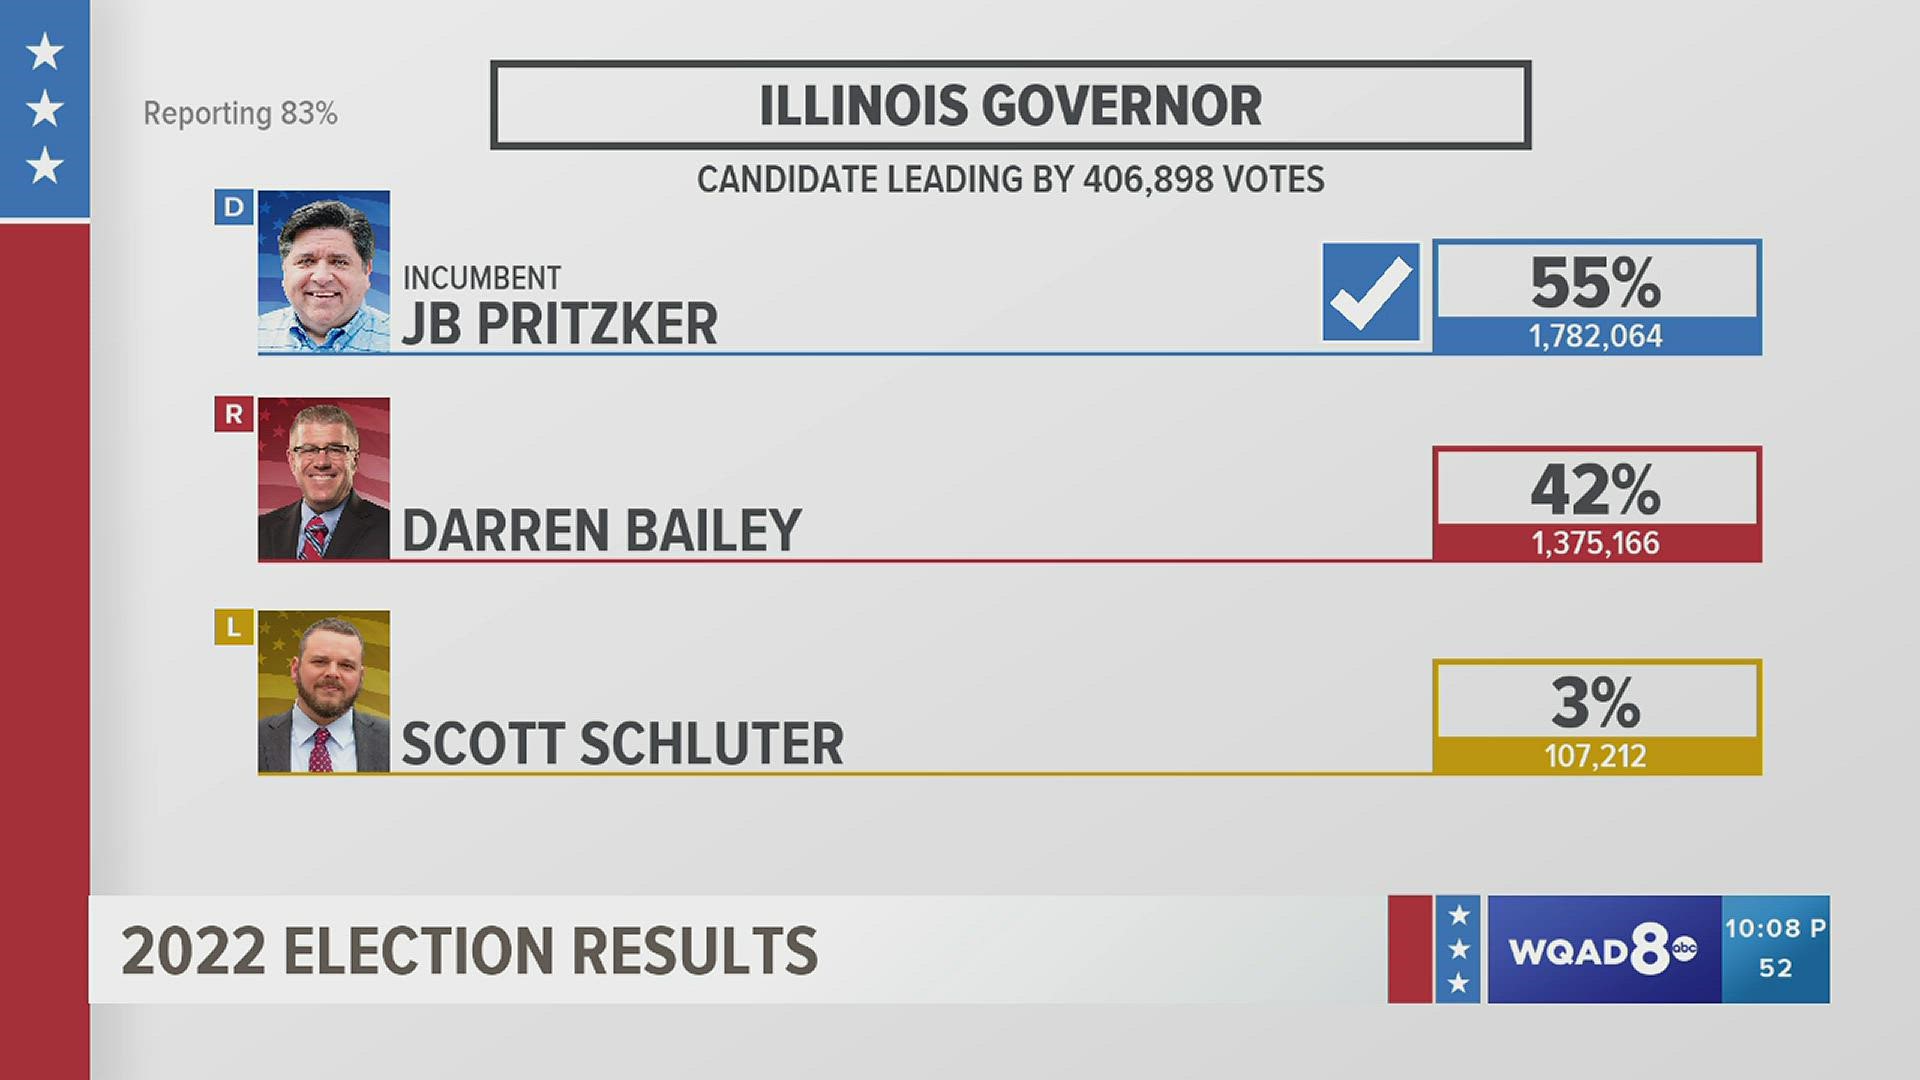 Gov. J.B. Pritzker sailed to reelection over challenger Darren Bailey in a race characterized by near-constant acrimony and outsized spending.